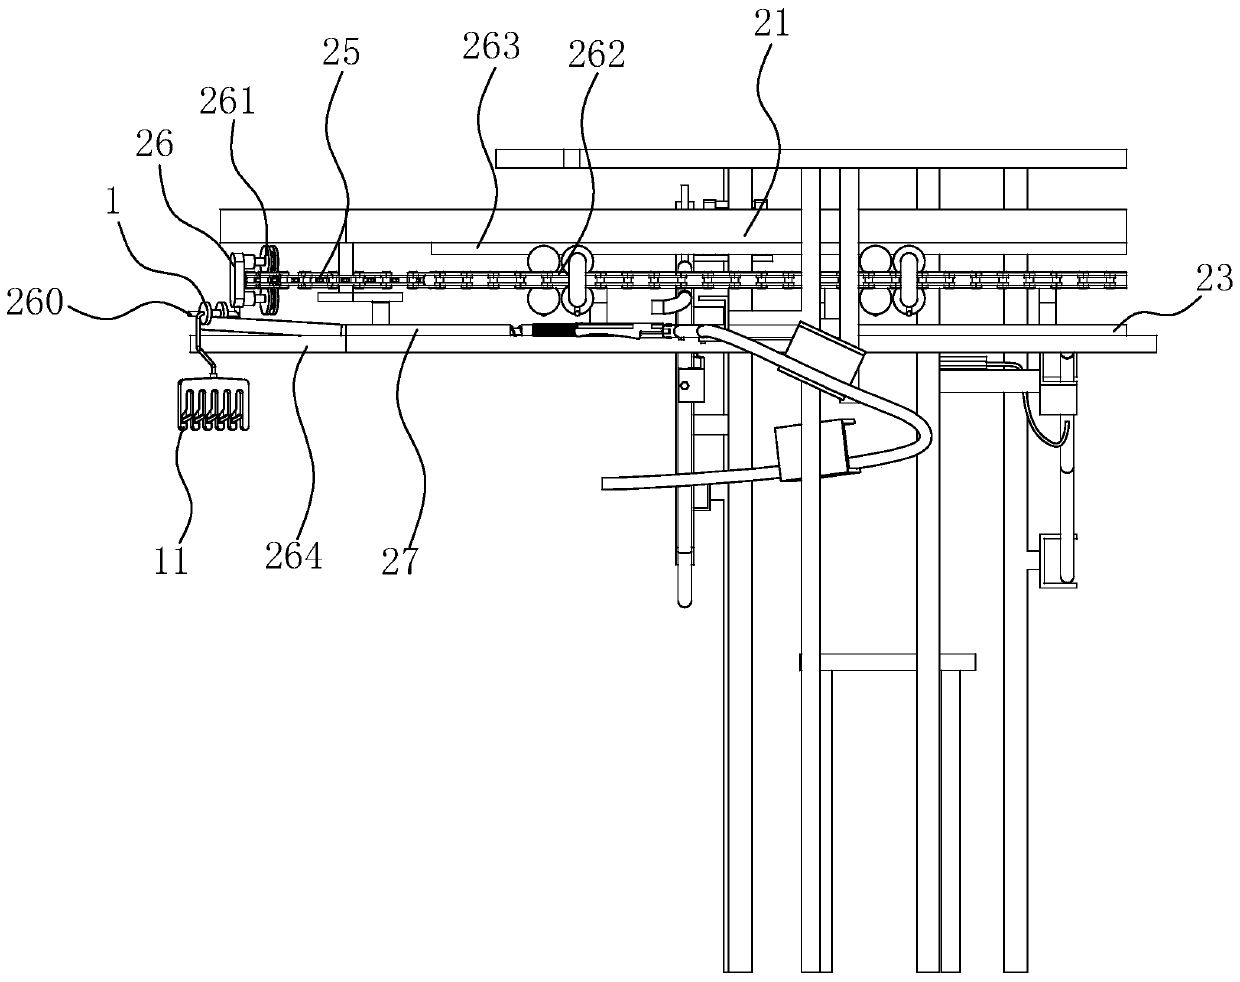 Clothing hanging conveying system